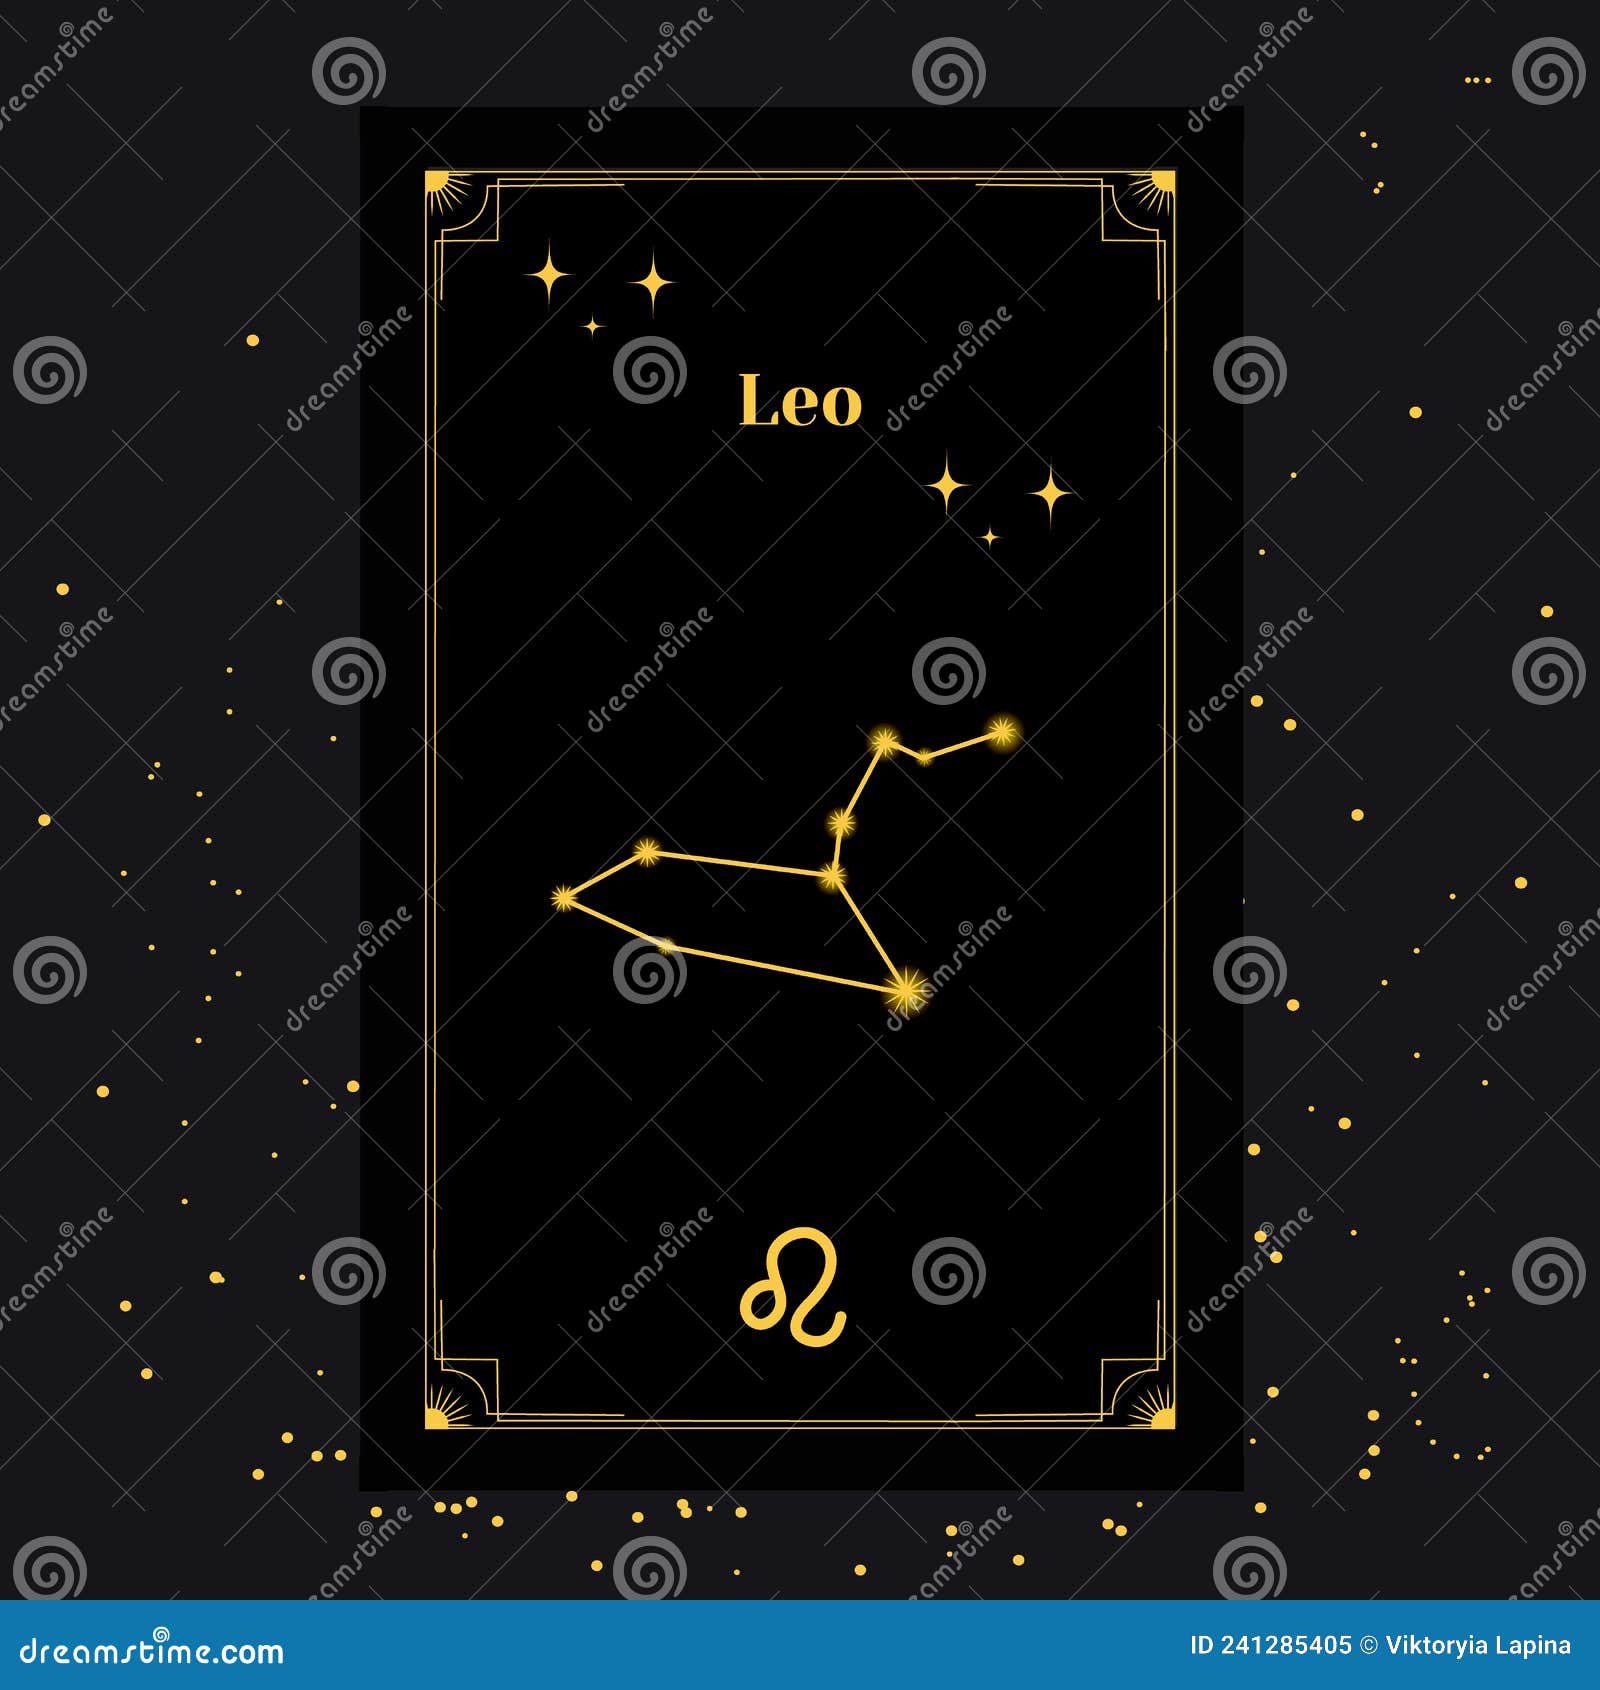 Leo Signs, Zodiac Background. Beautiful Vector Images Stock ...